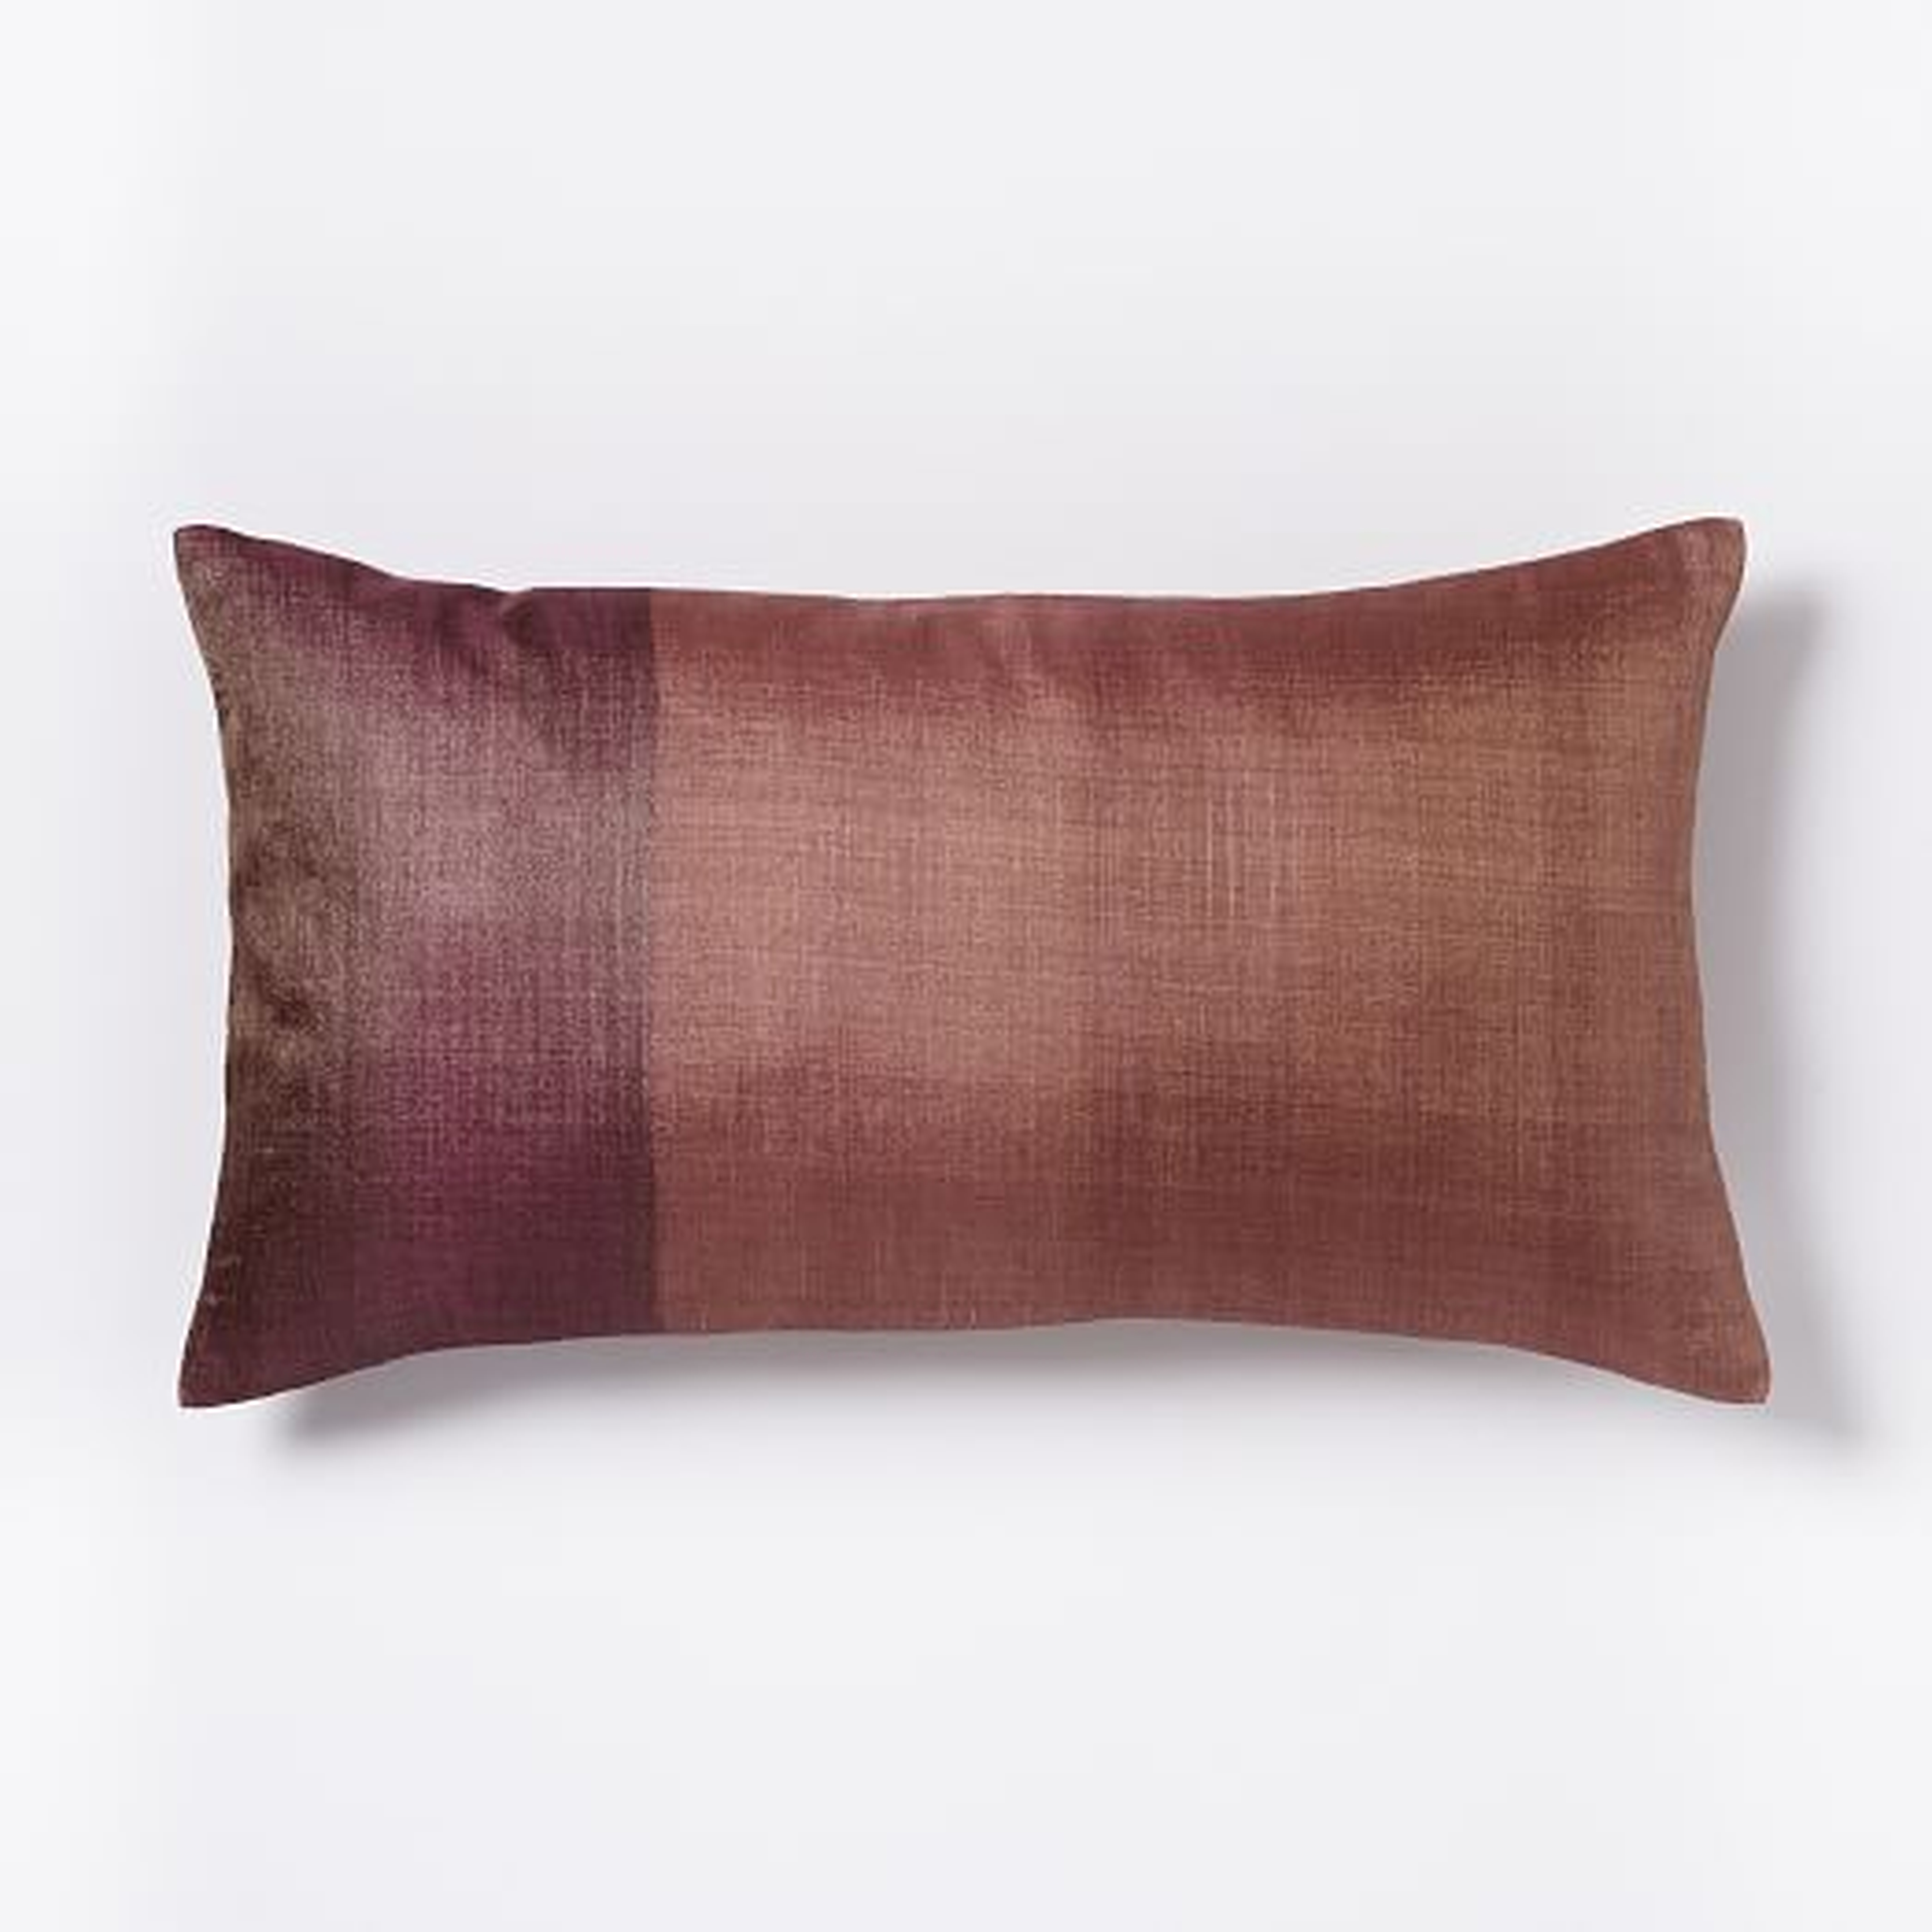 Sari Silk Two-Toned Pillow Cover - West Elm